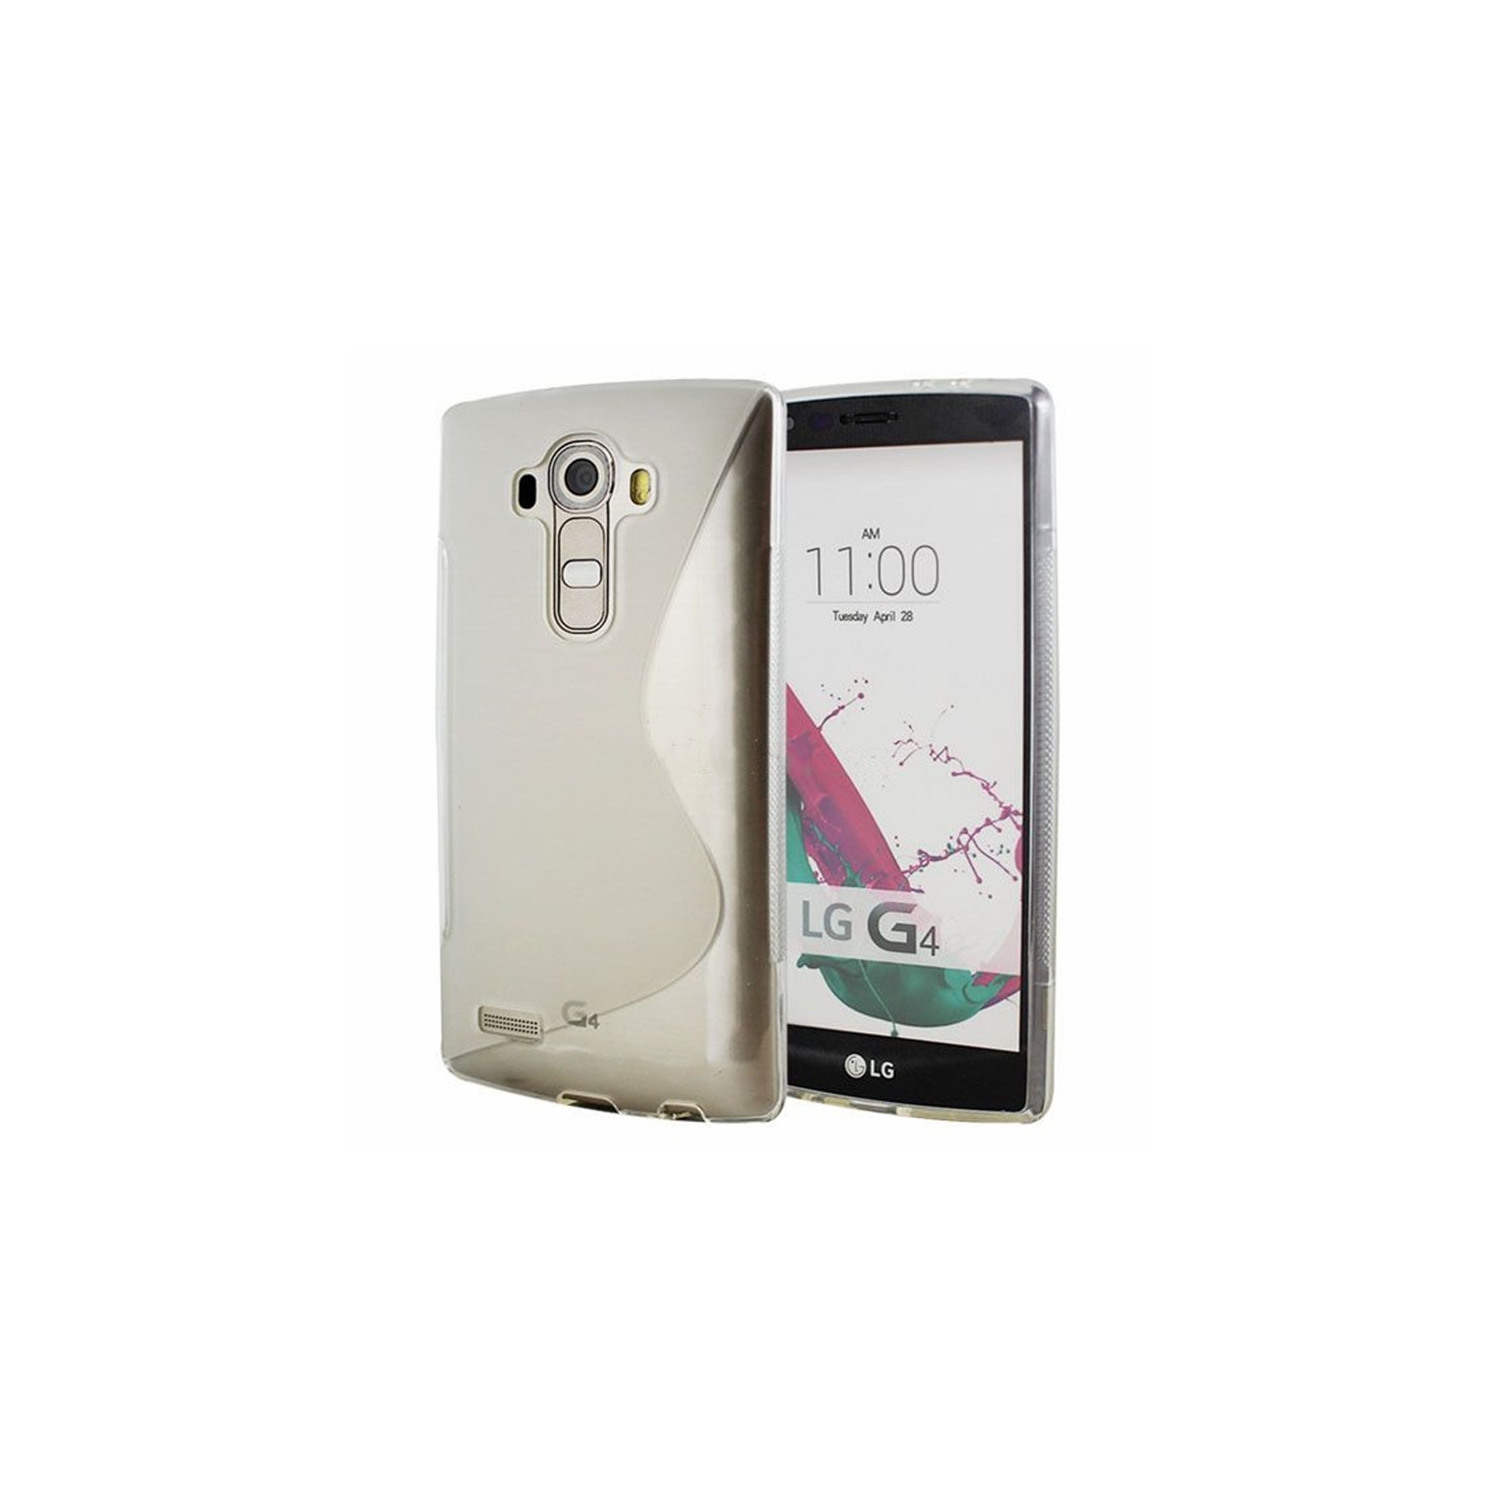 【CSmart】 Ultra Thin Soft TPU Silicone Jelly Bumper Back Cover Case for LG G4, Clear